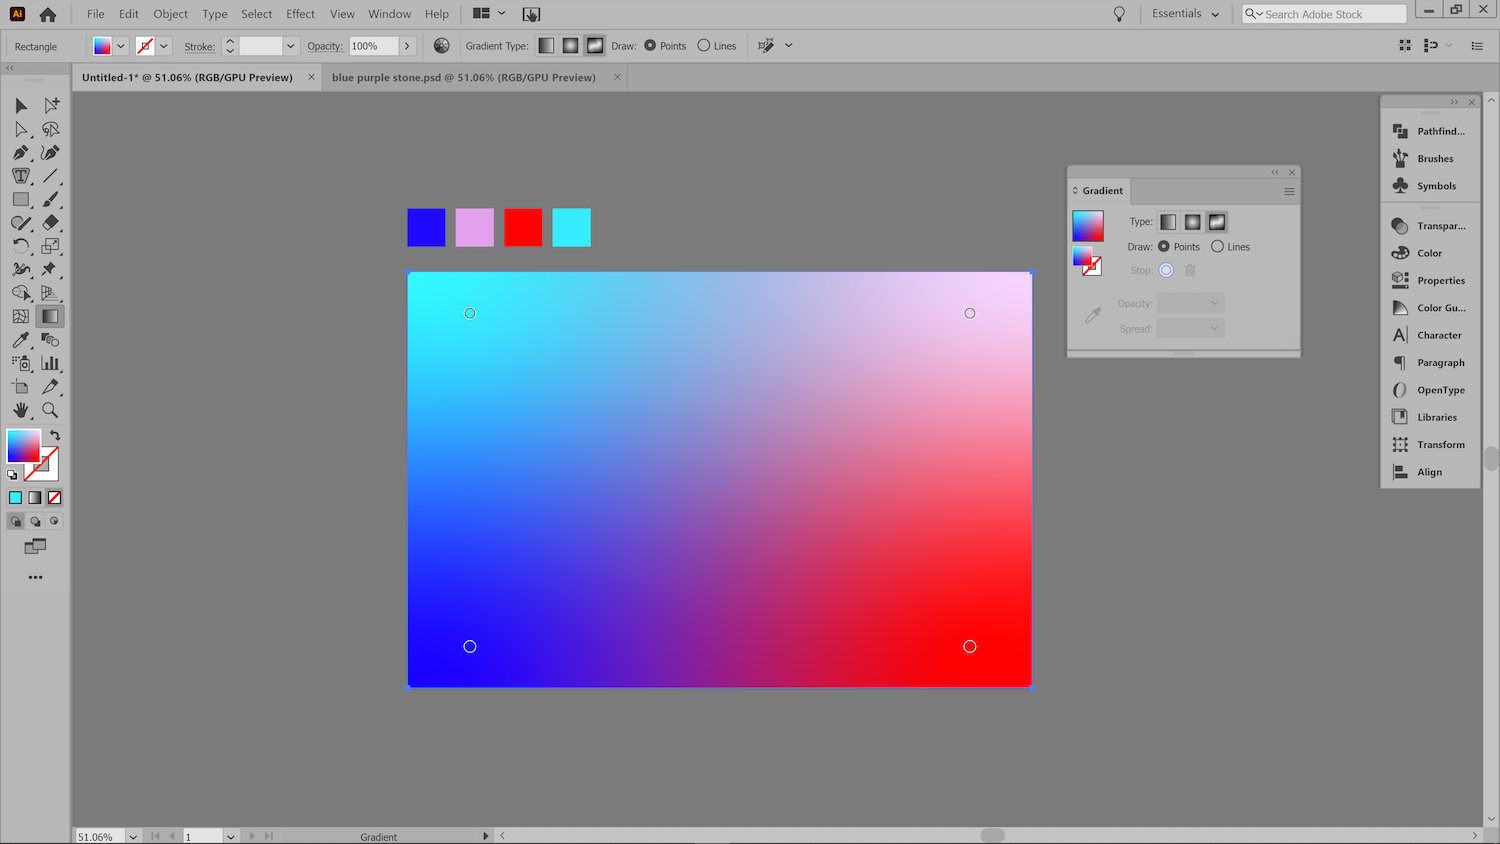 screenshot of illustrator to demonstrate creating a gradient